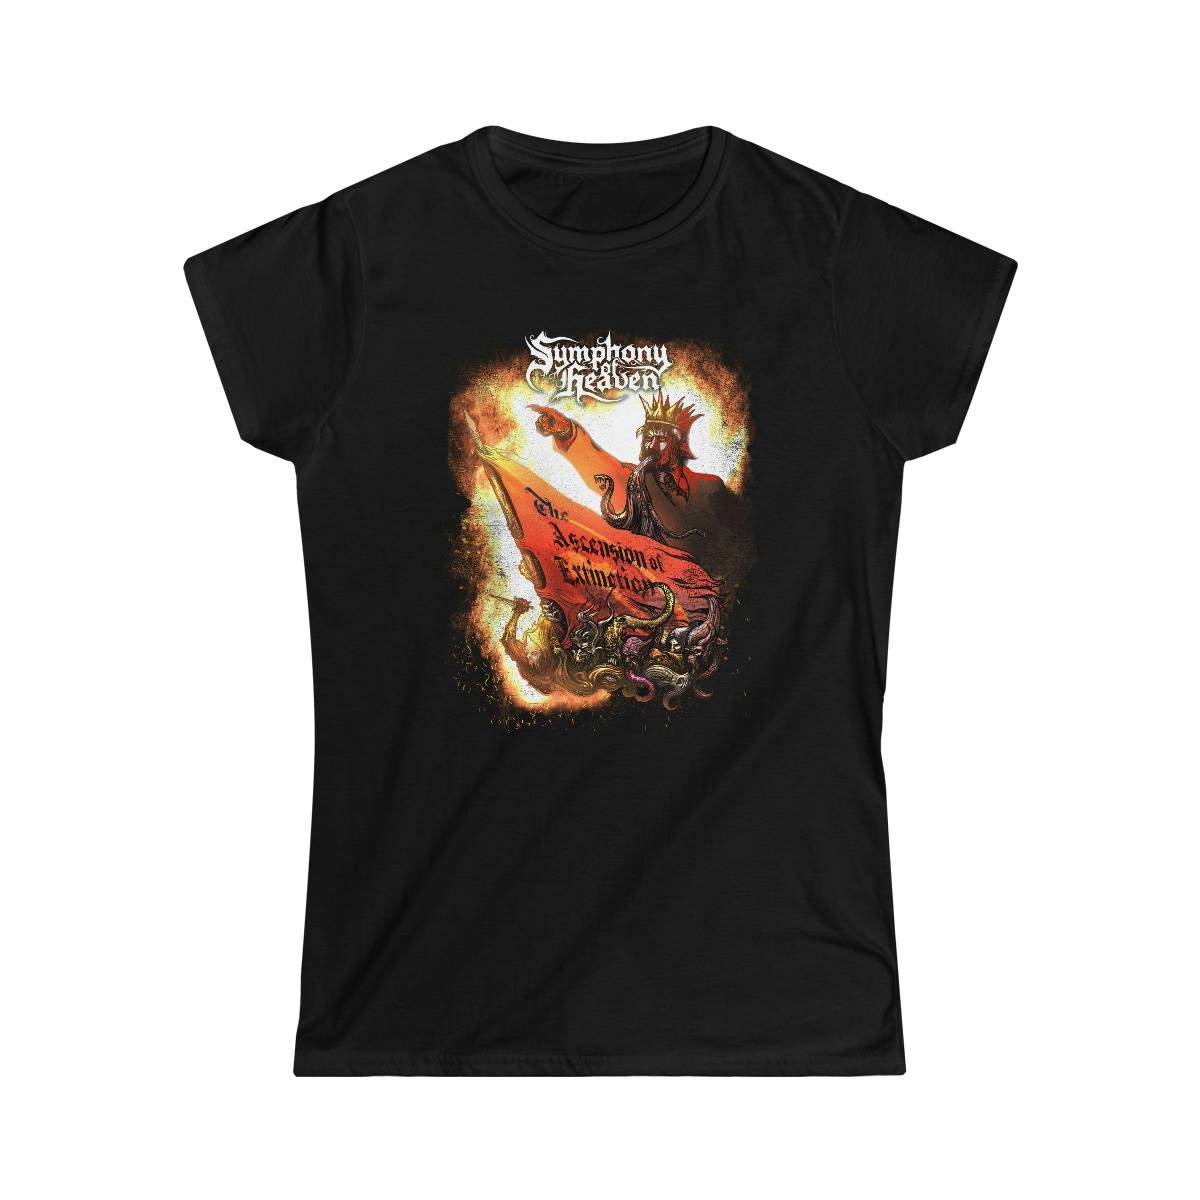 Symphony of Heaven – The Ascension of Extinction Women’s Tshirt